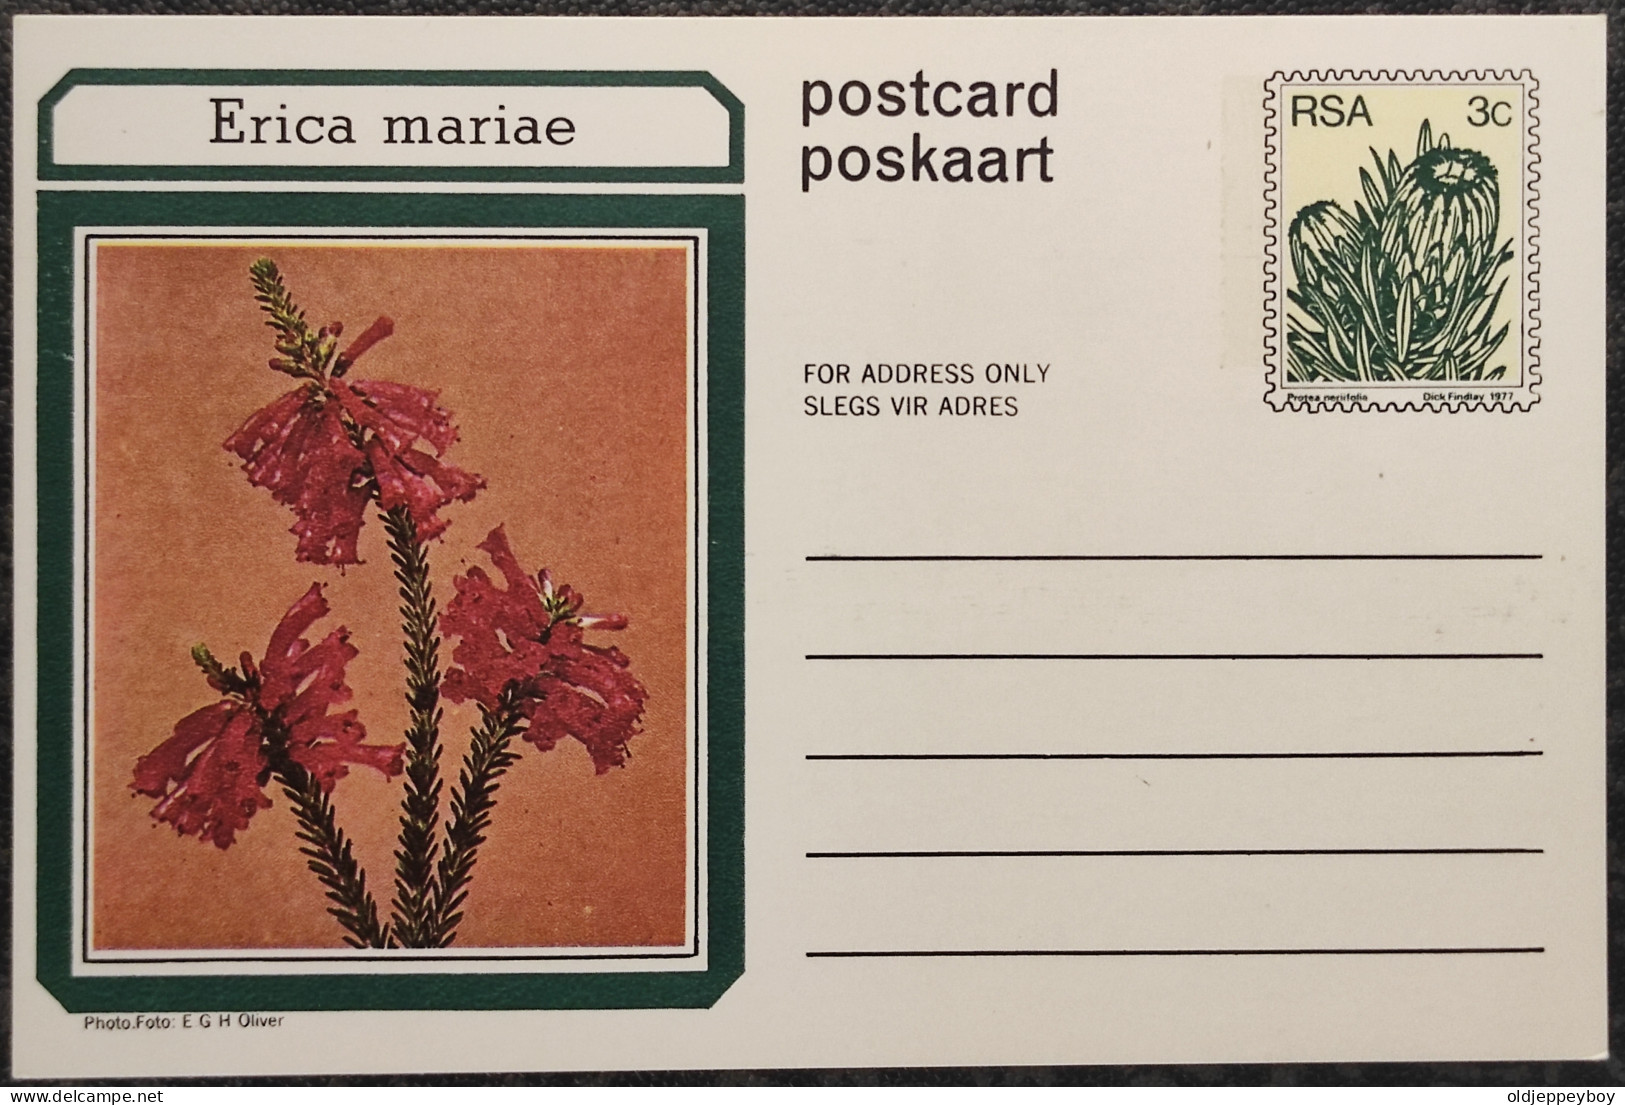 3c SOUTH AFRICA Postal STATIONERY CARD Illus ERICA MARIAE FLOWER Cover Stamps Flowers Rsa - Lettres & Documents